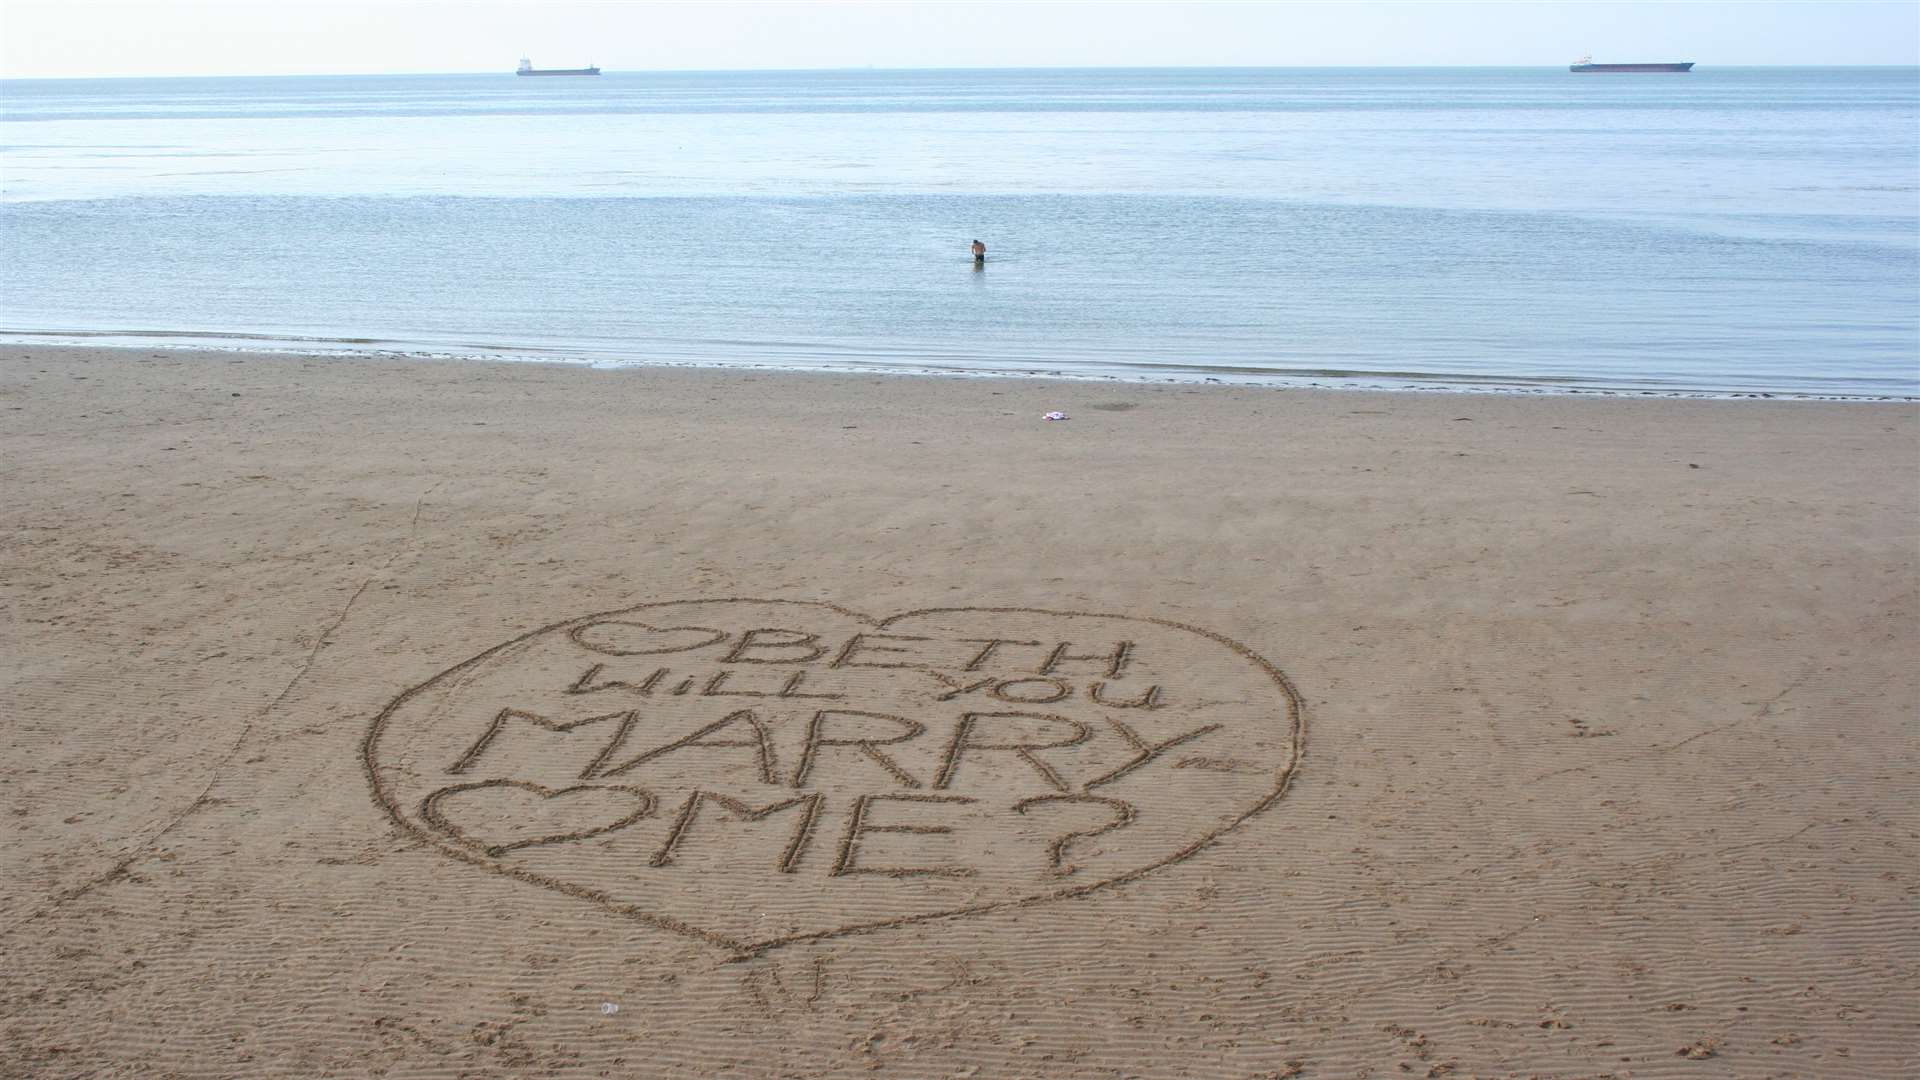 The marriage proposal written in the sand.